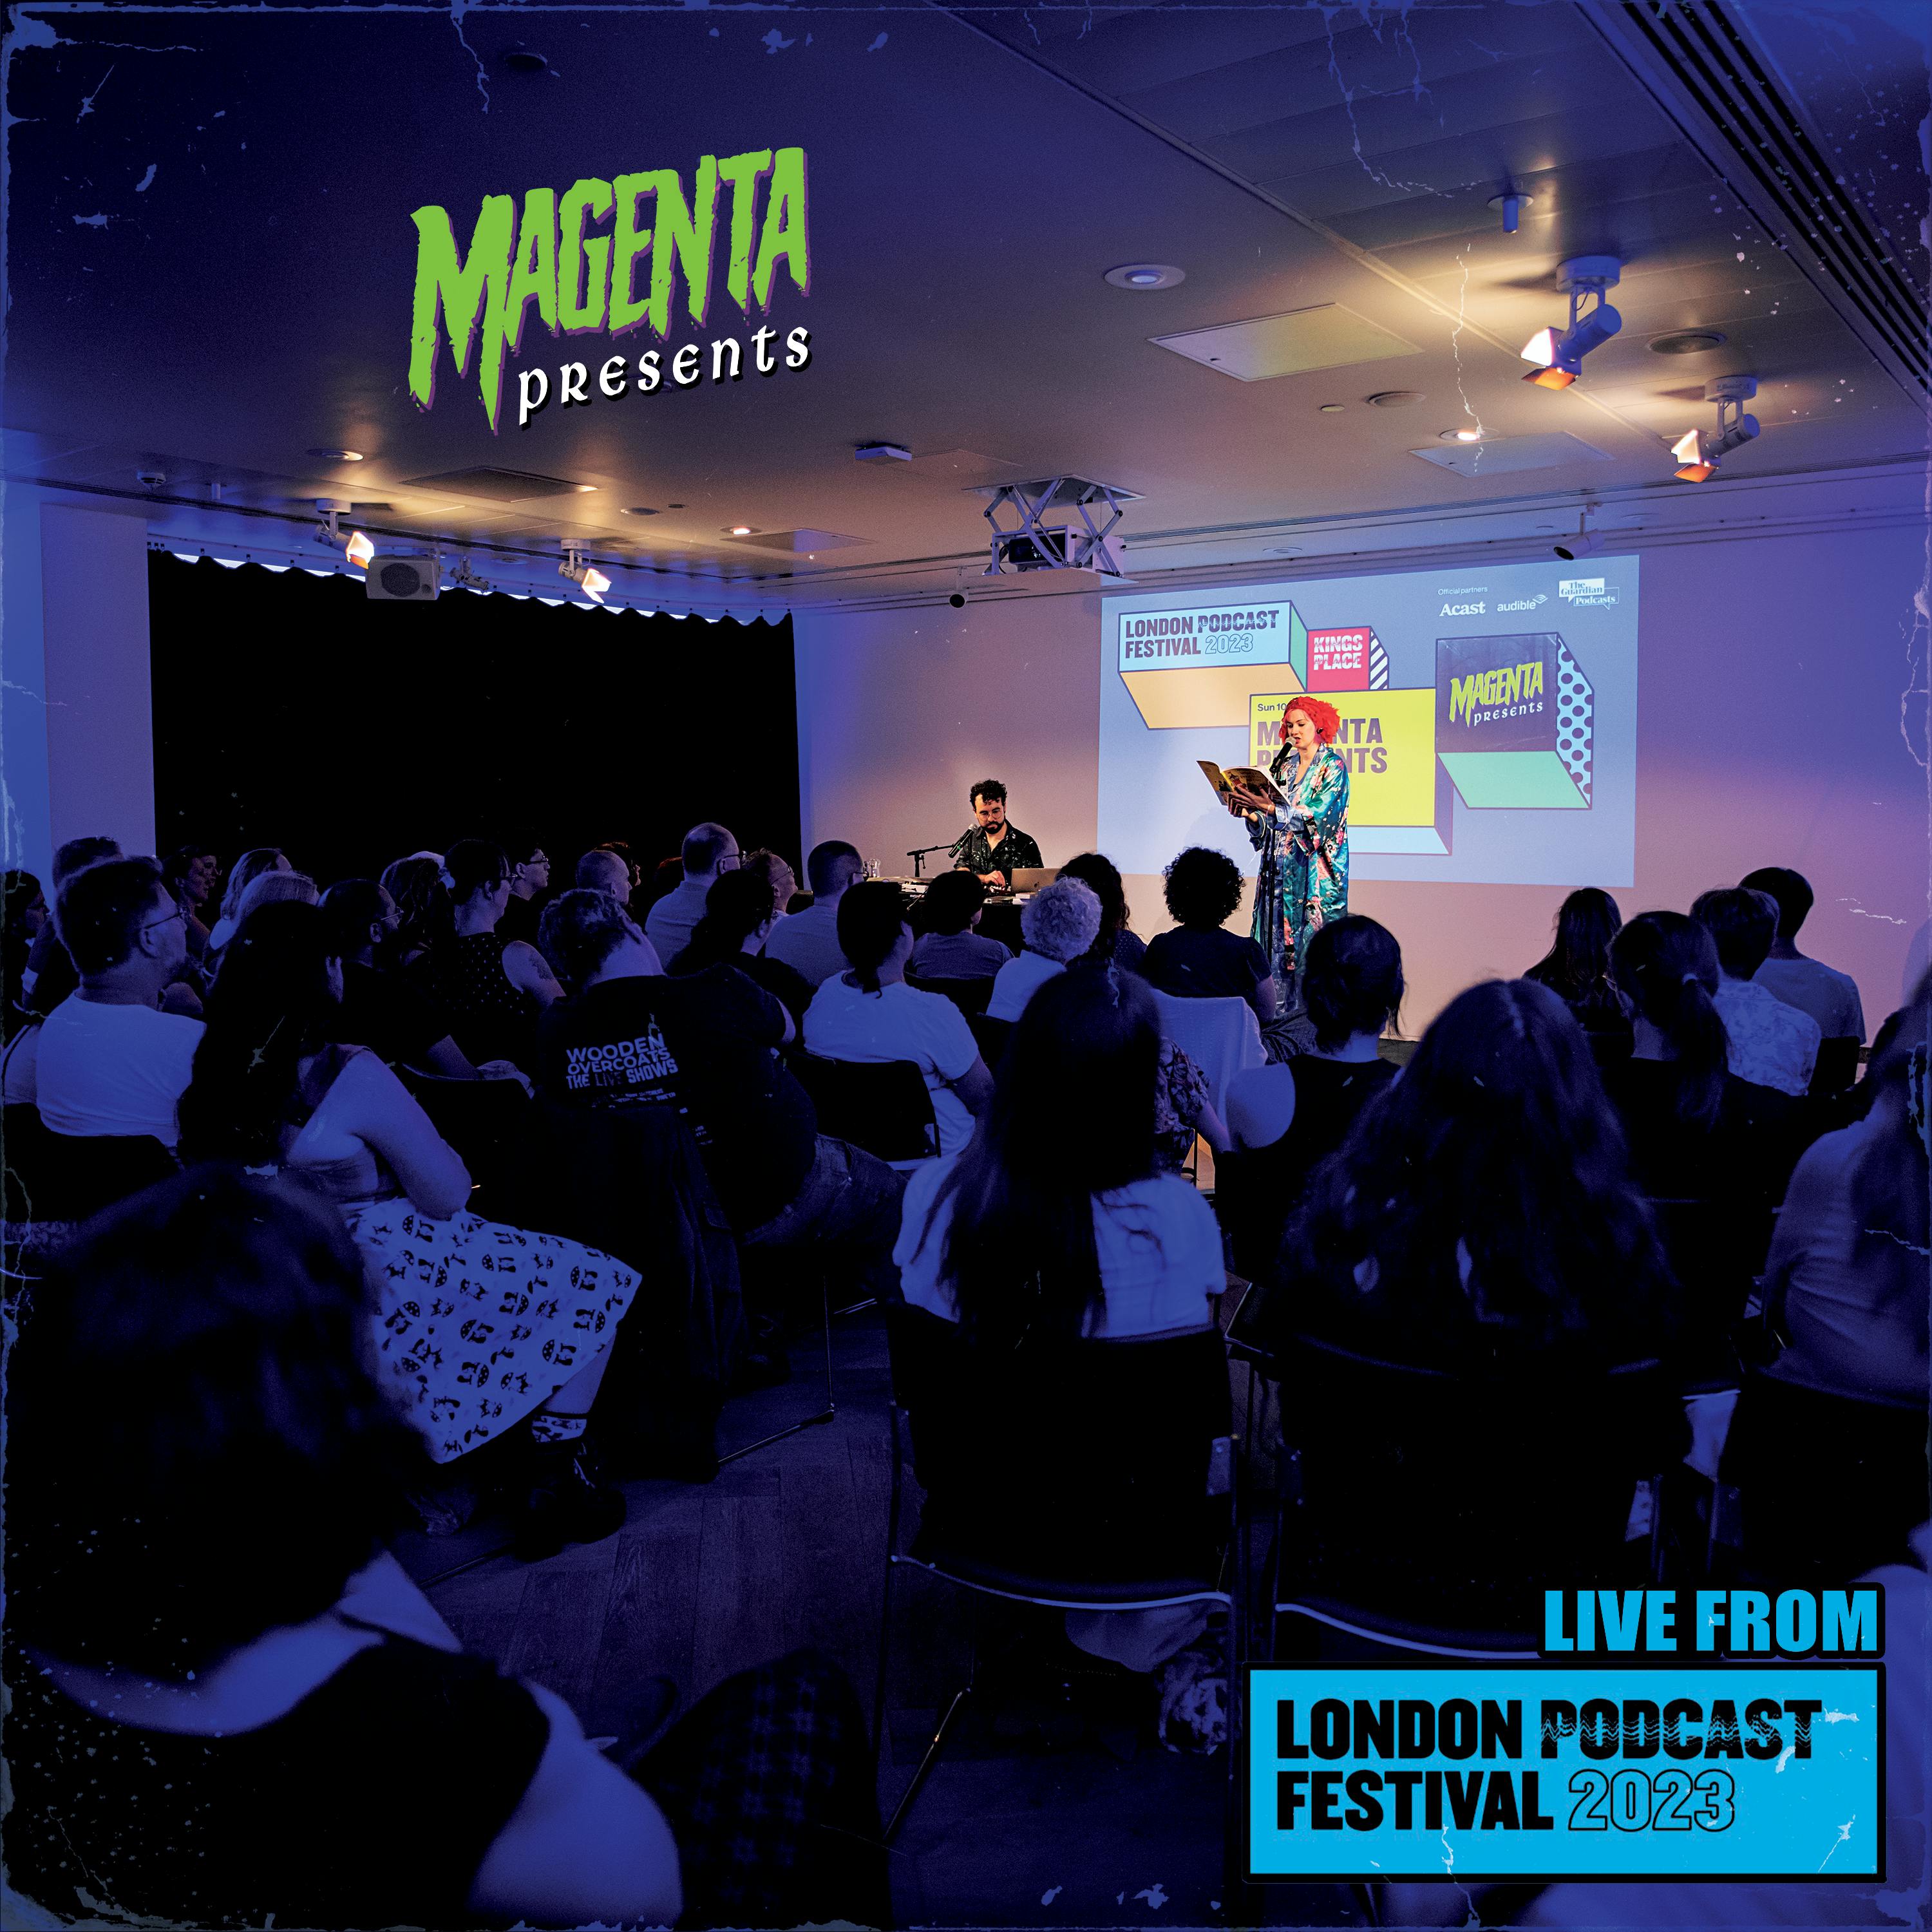 Live! From the London Podcast Festival 2023